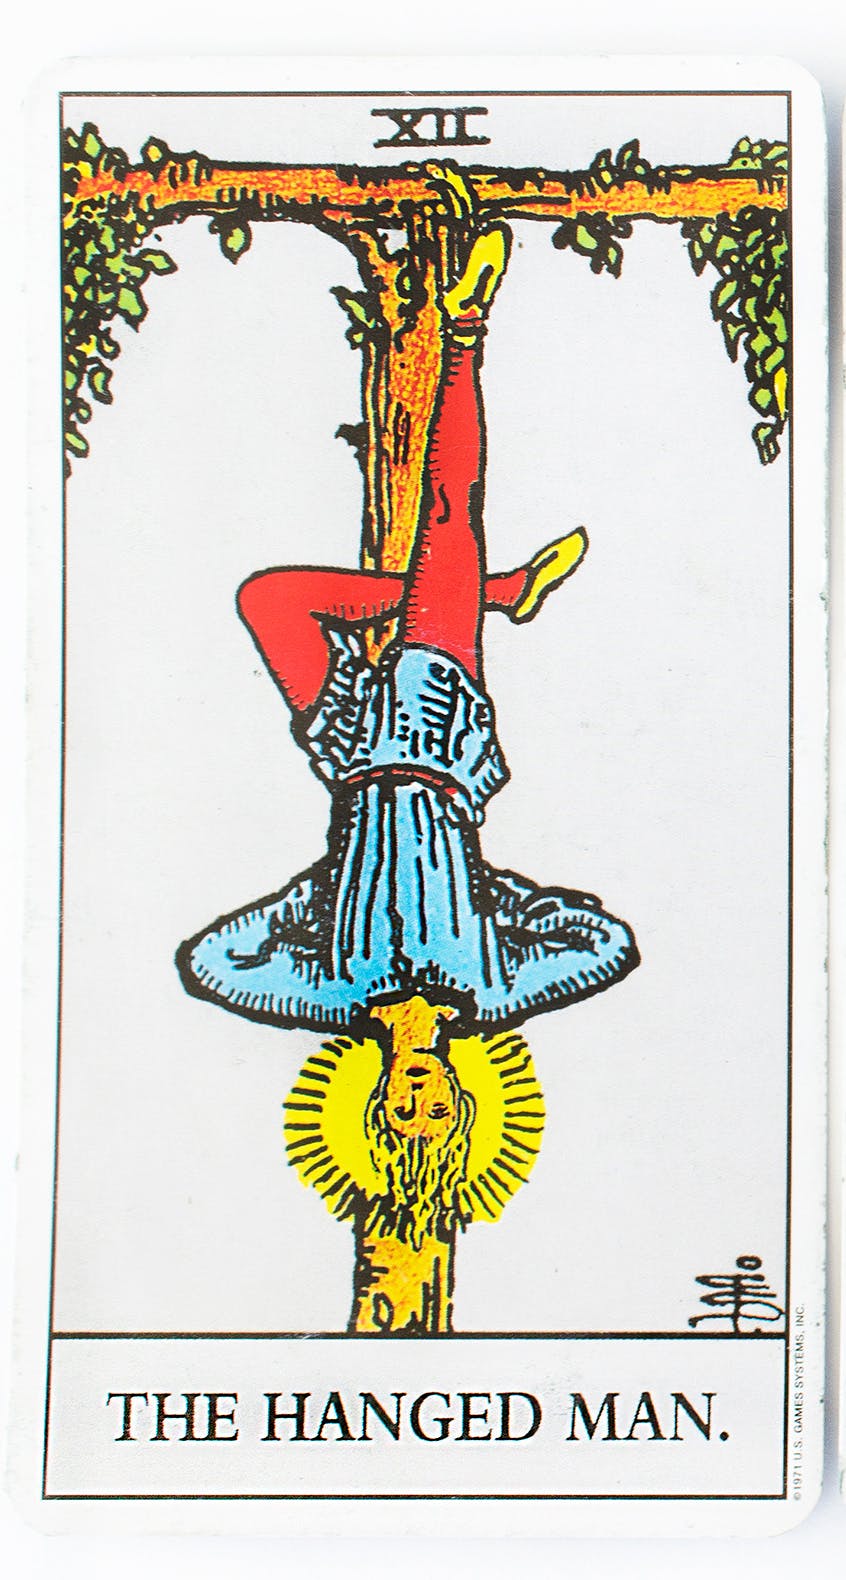 the hanged man from the Rider-Waite tarot deck. image of a man hanging by one ankle upside down on a cross.